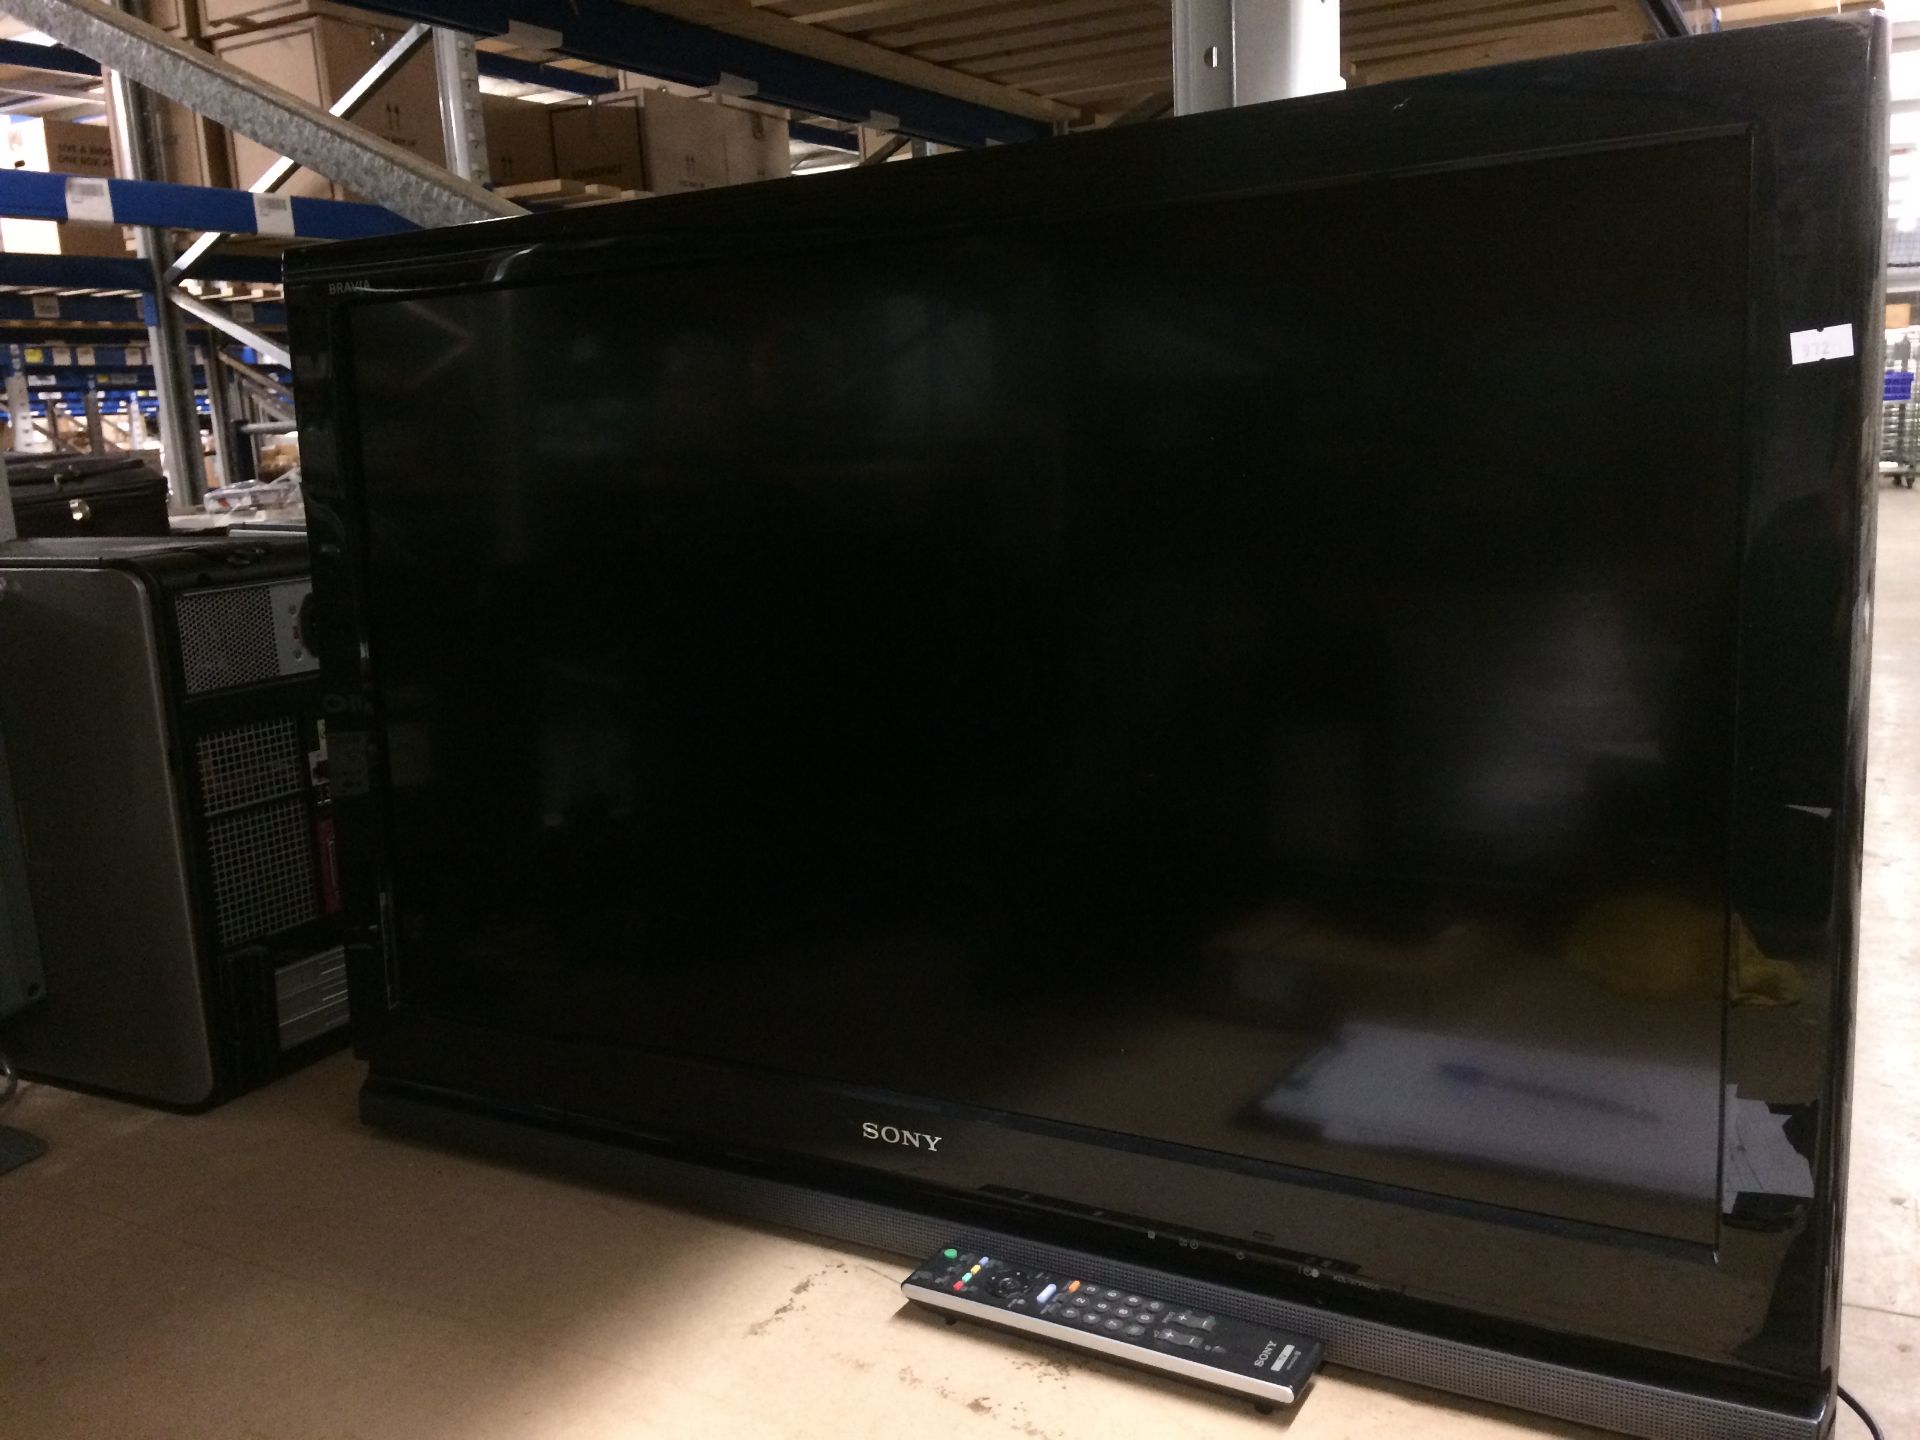 Sony Bravia LCD digital colour TV - model KDL-37V400 complete with remote control (no stand)